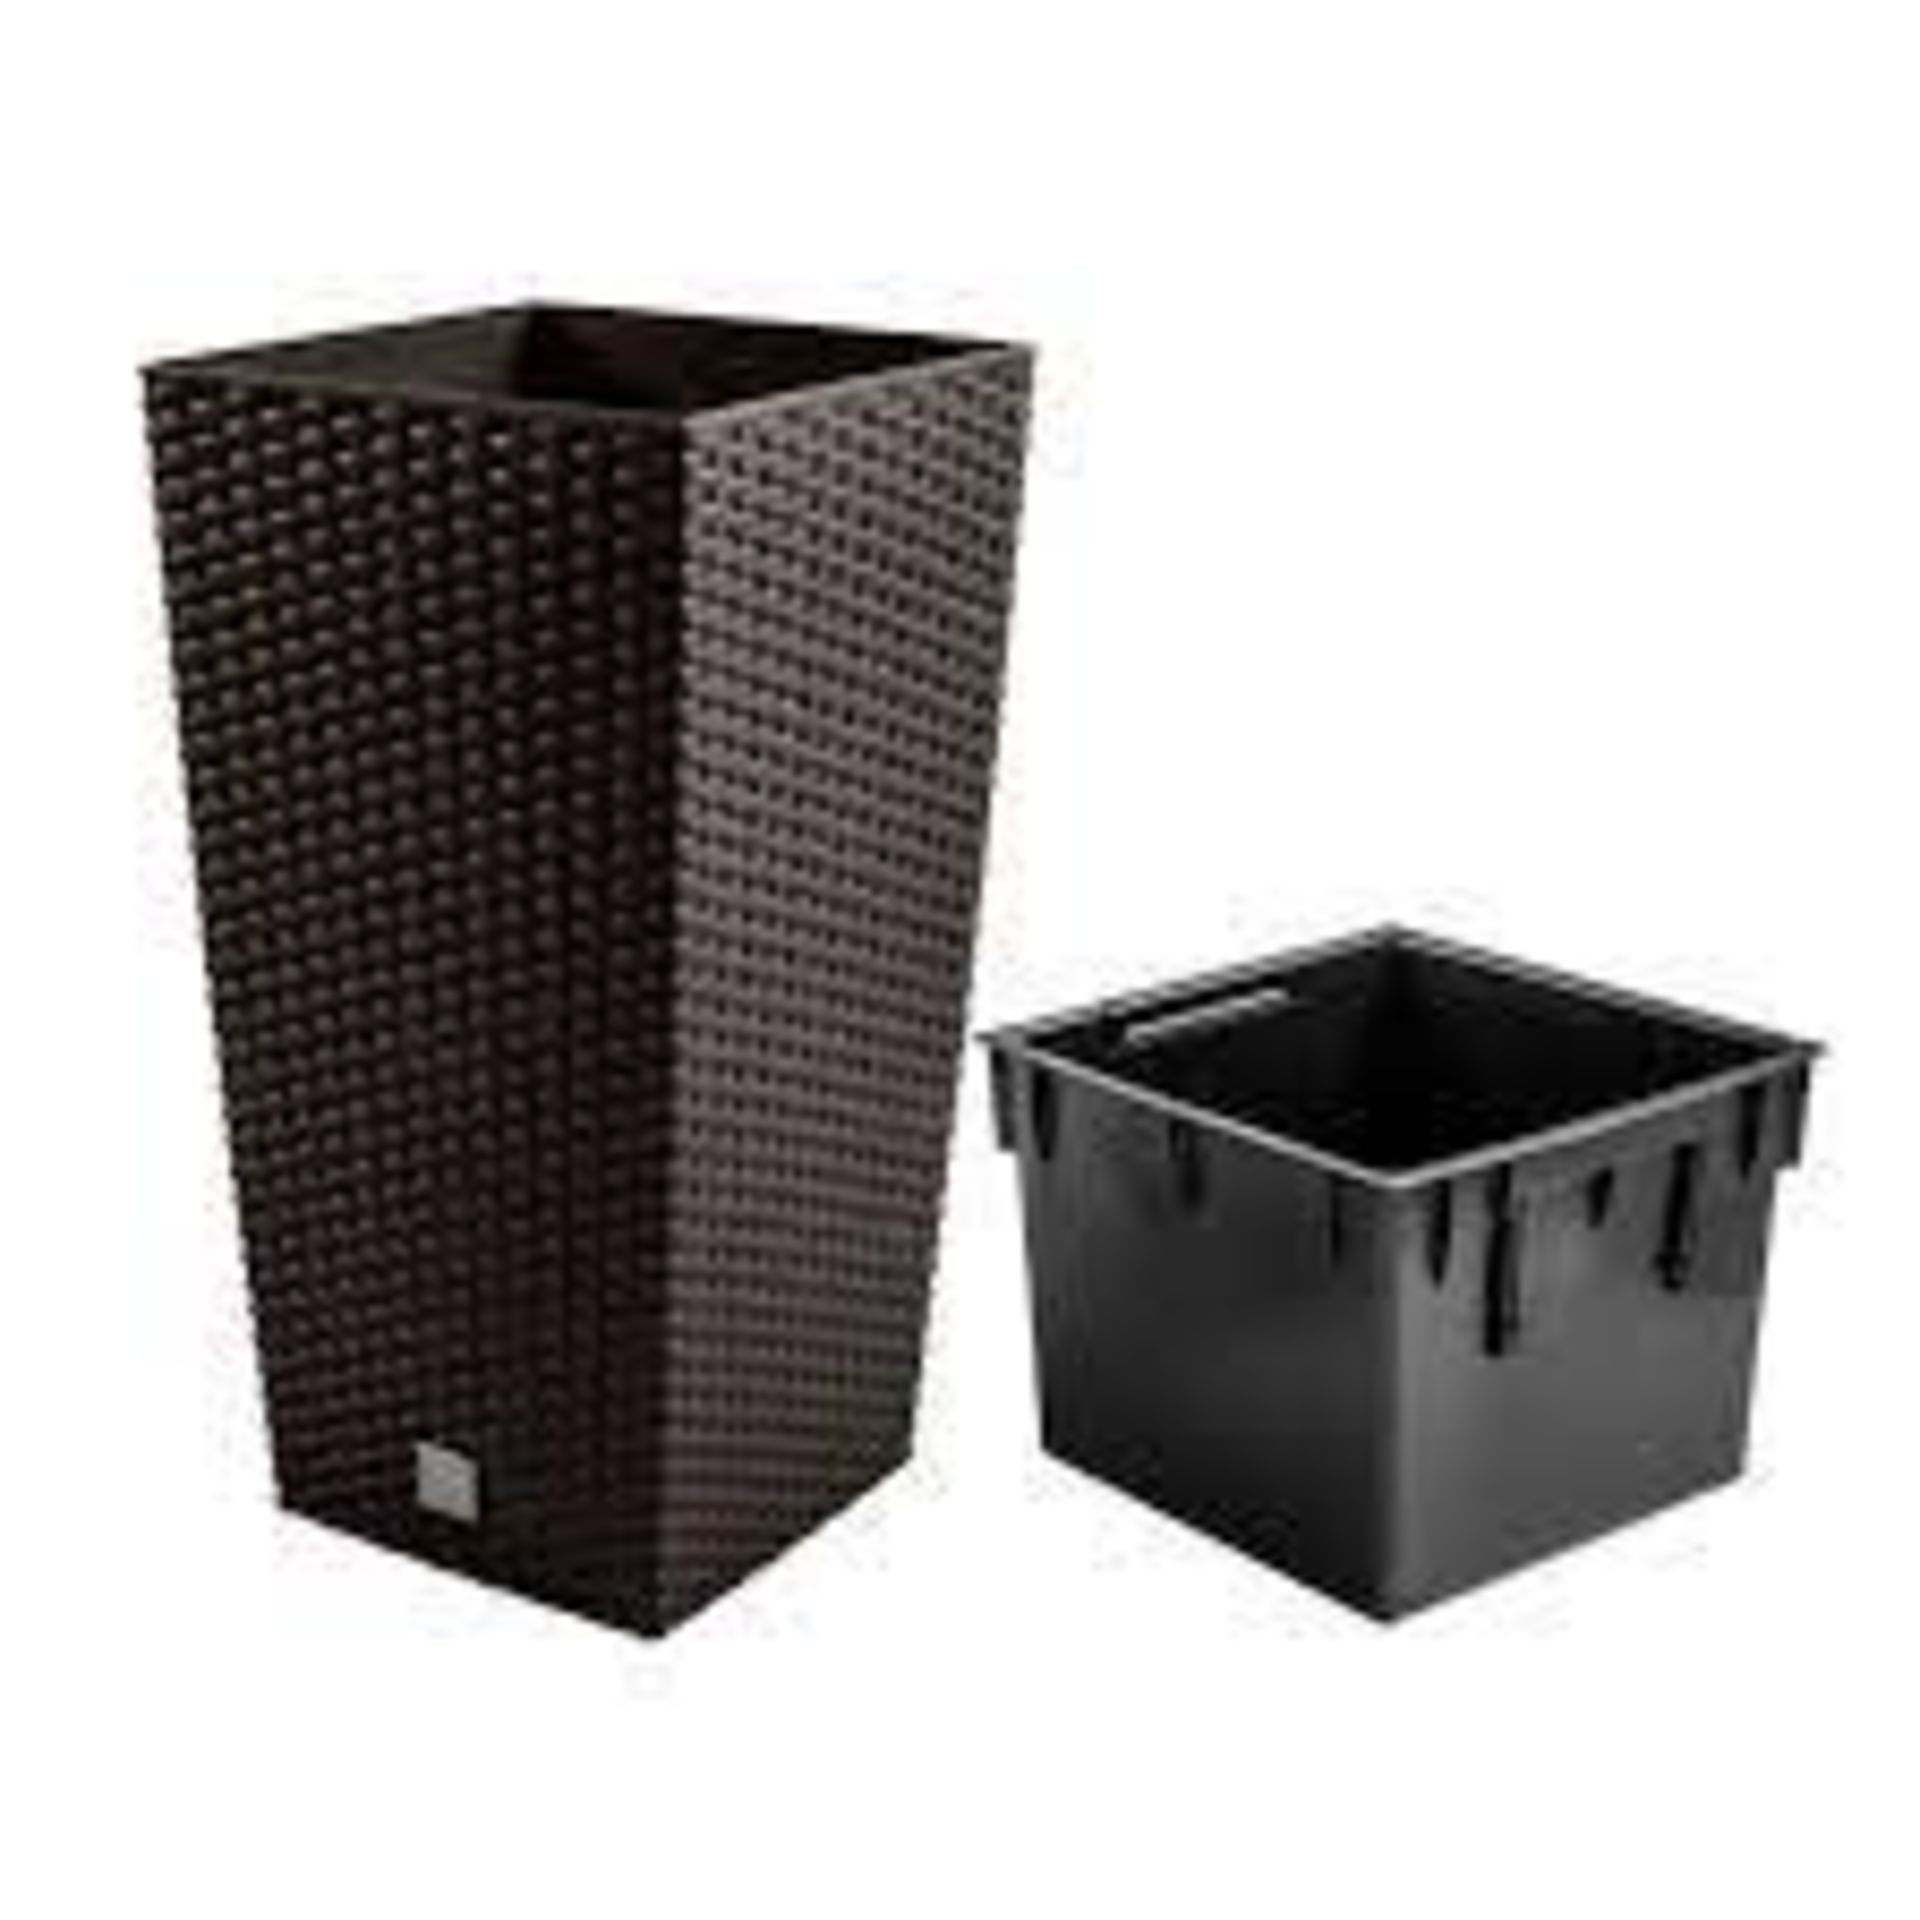 2X PROSPERPLAST DRTS265 RATO SQUARE RATAN PLANTERS COMBINED RRP £30.00 (AS SEEN IN WAYFAIR)Condition